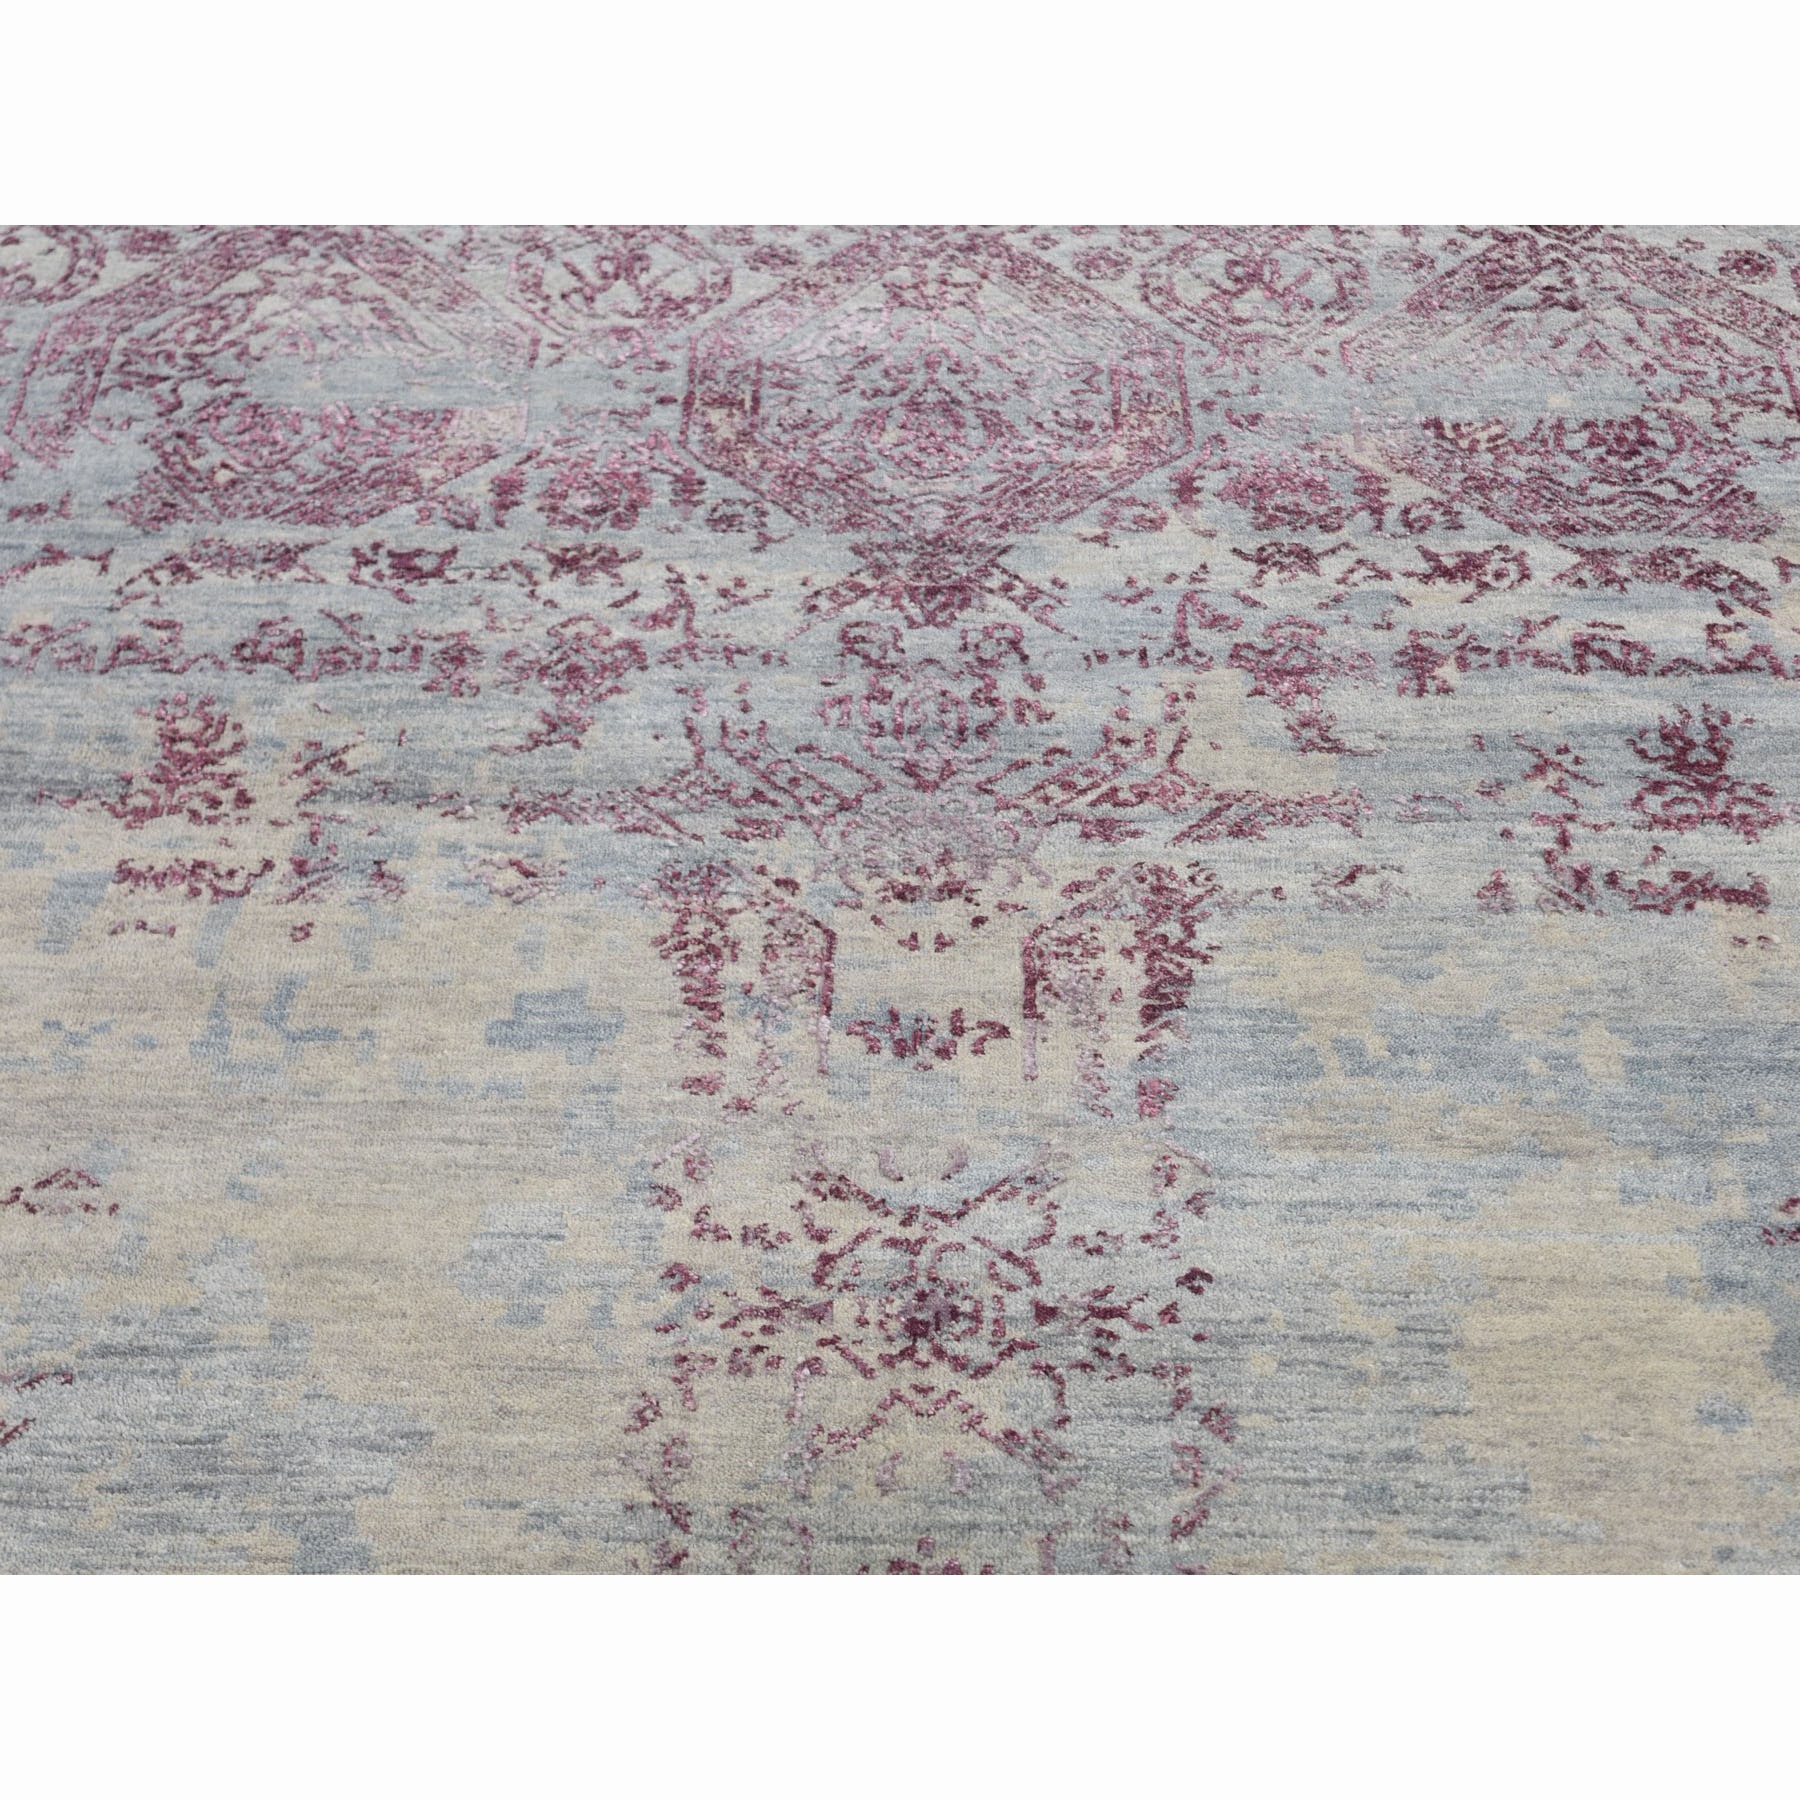 9-x11-7  Hi-Low Pile Abstract Jewellery Design Wool And Silk Hand Knotted Modern Rug 